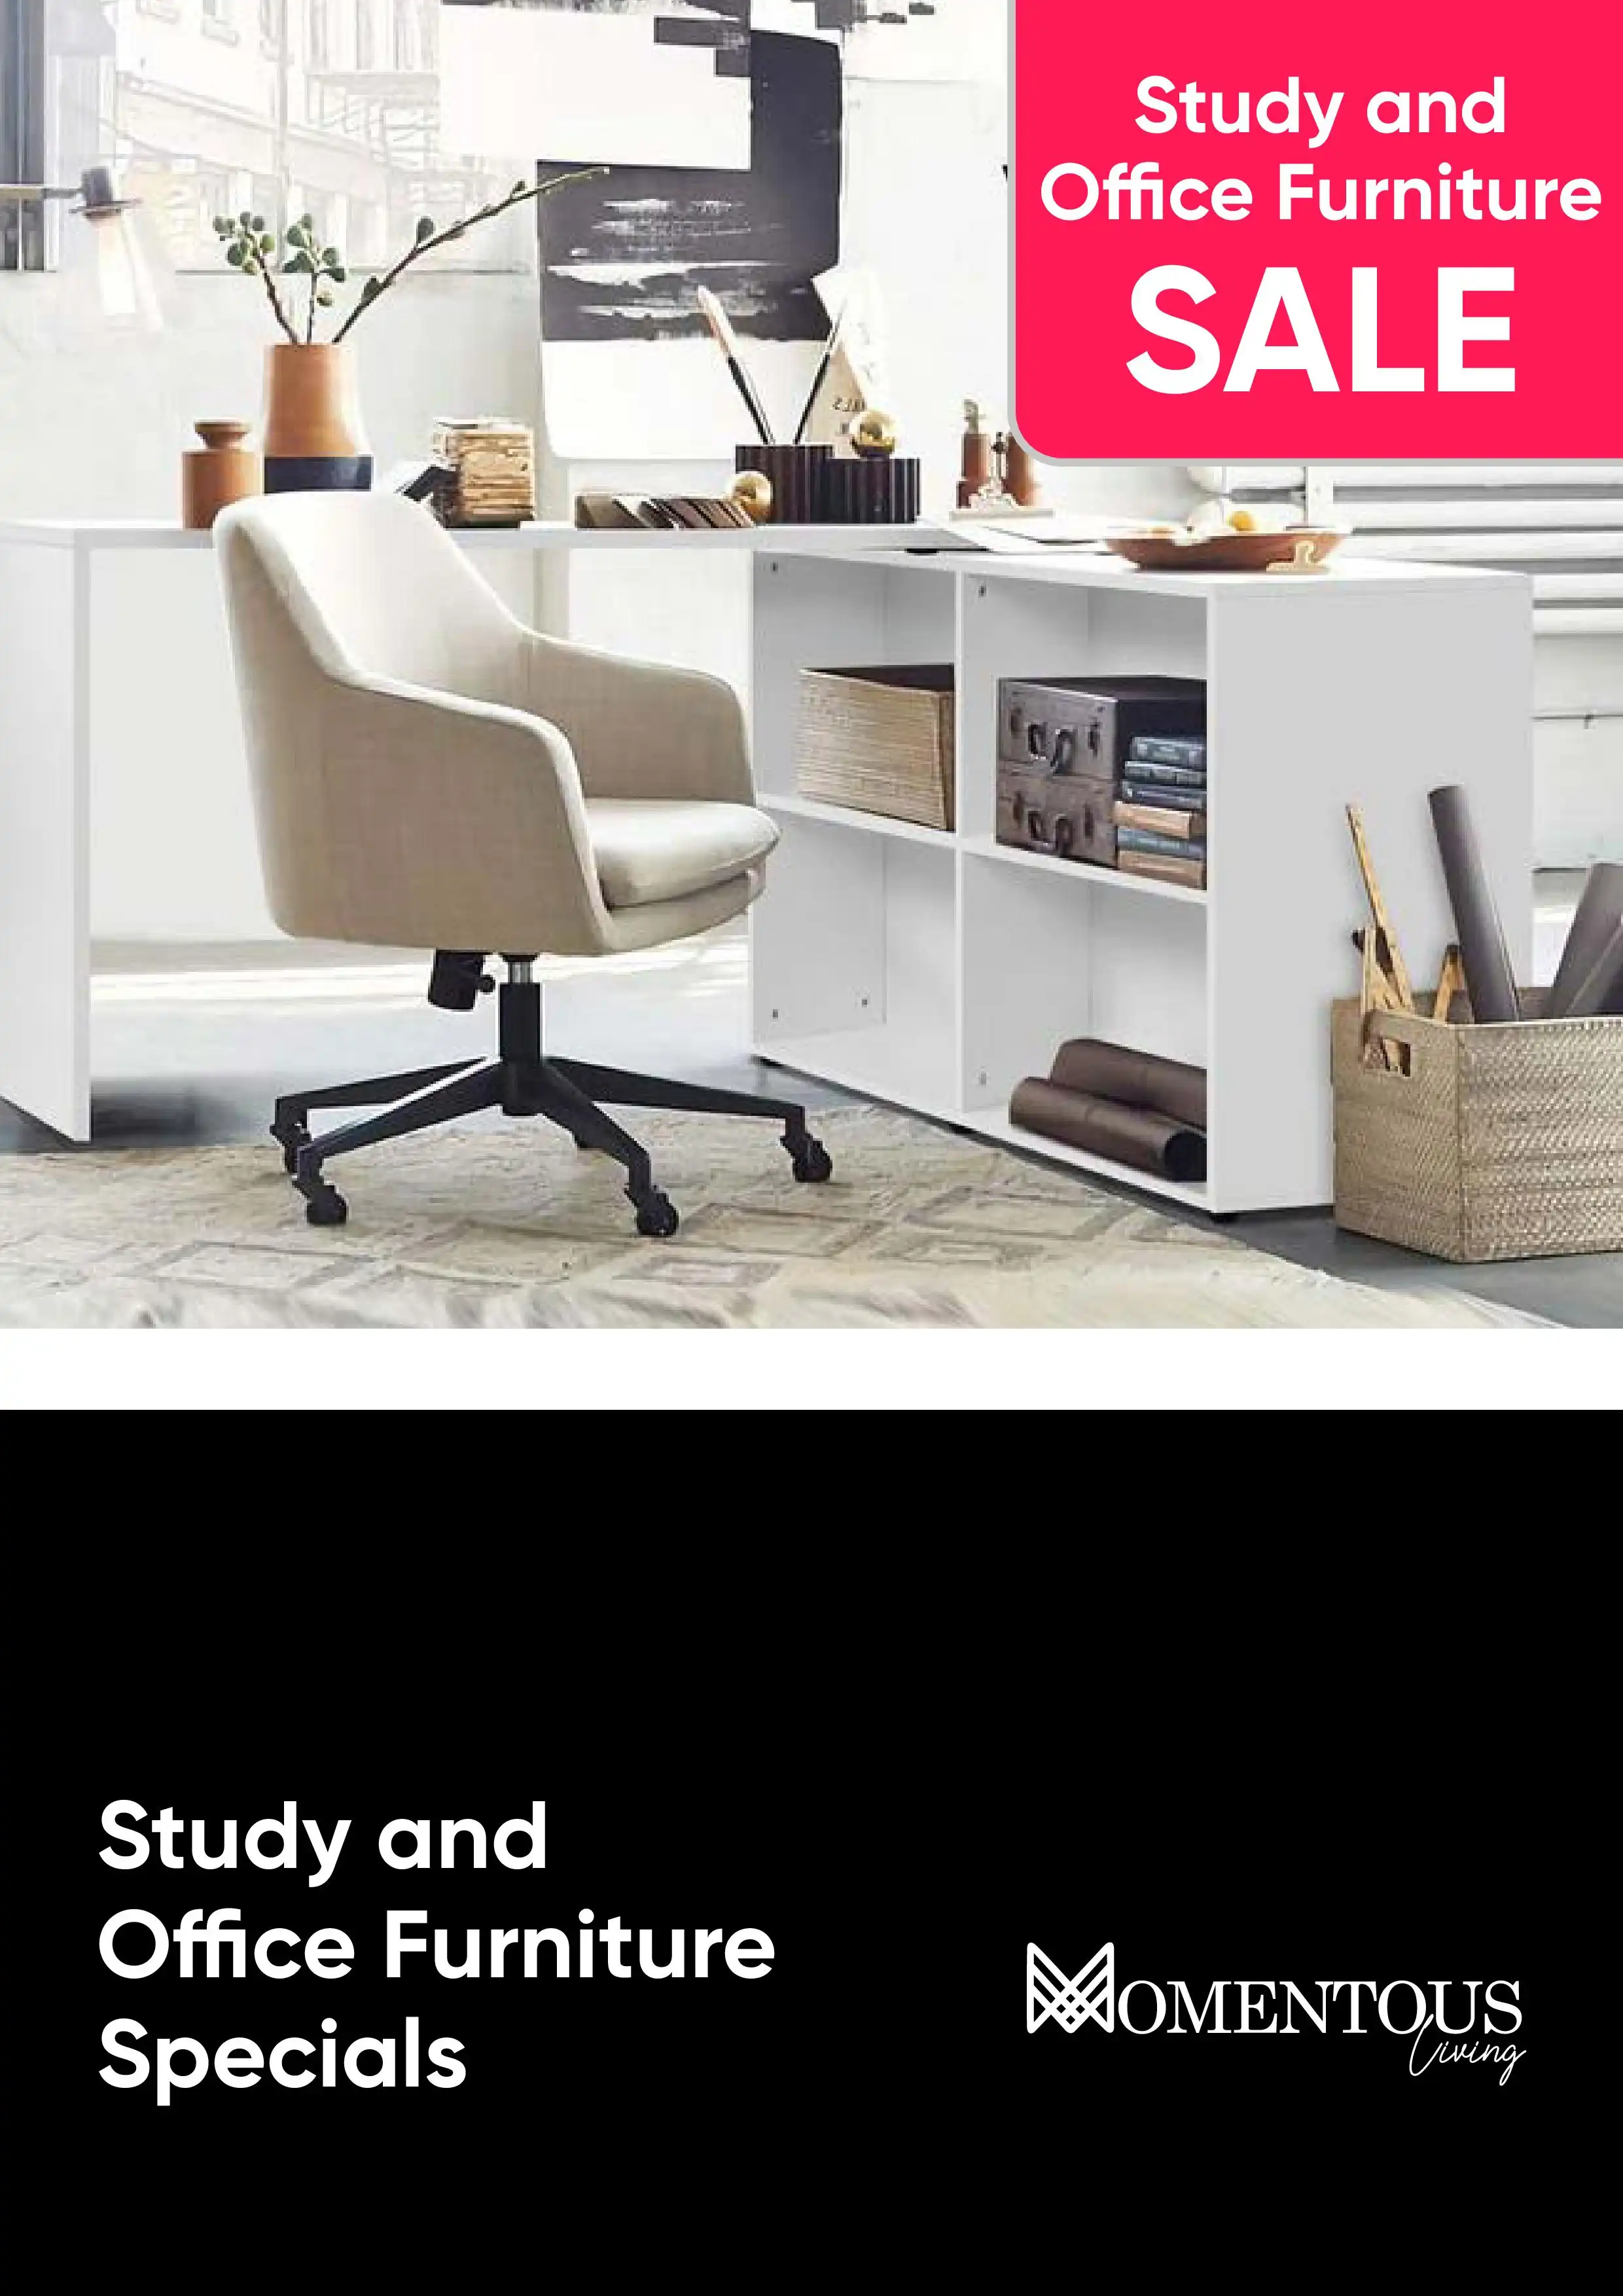 Study and Office Furniture Sale – Computer Desks, Office Chairs and More